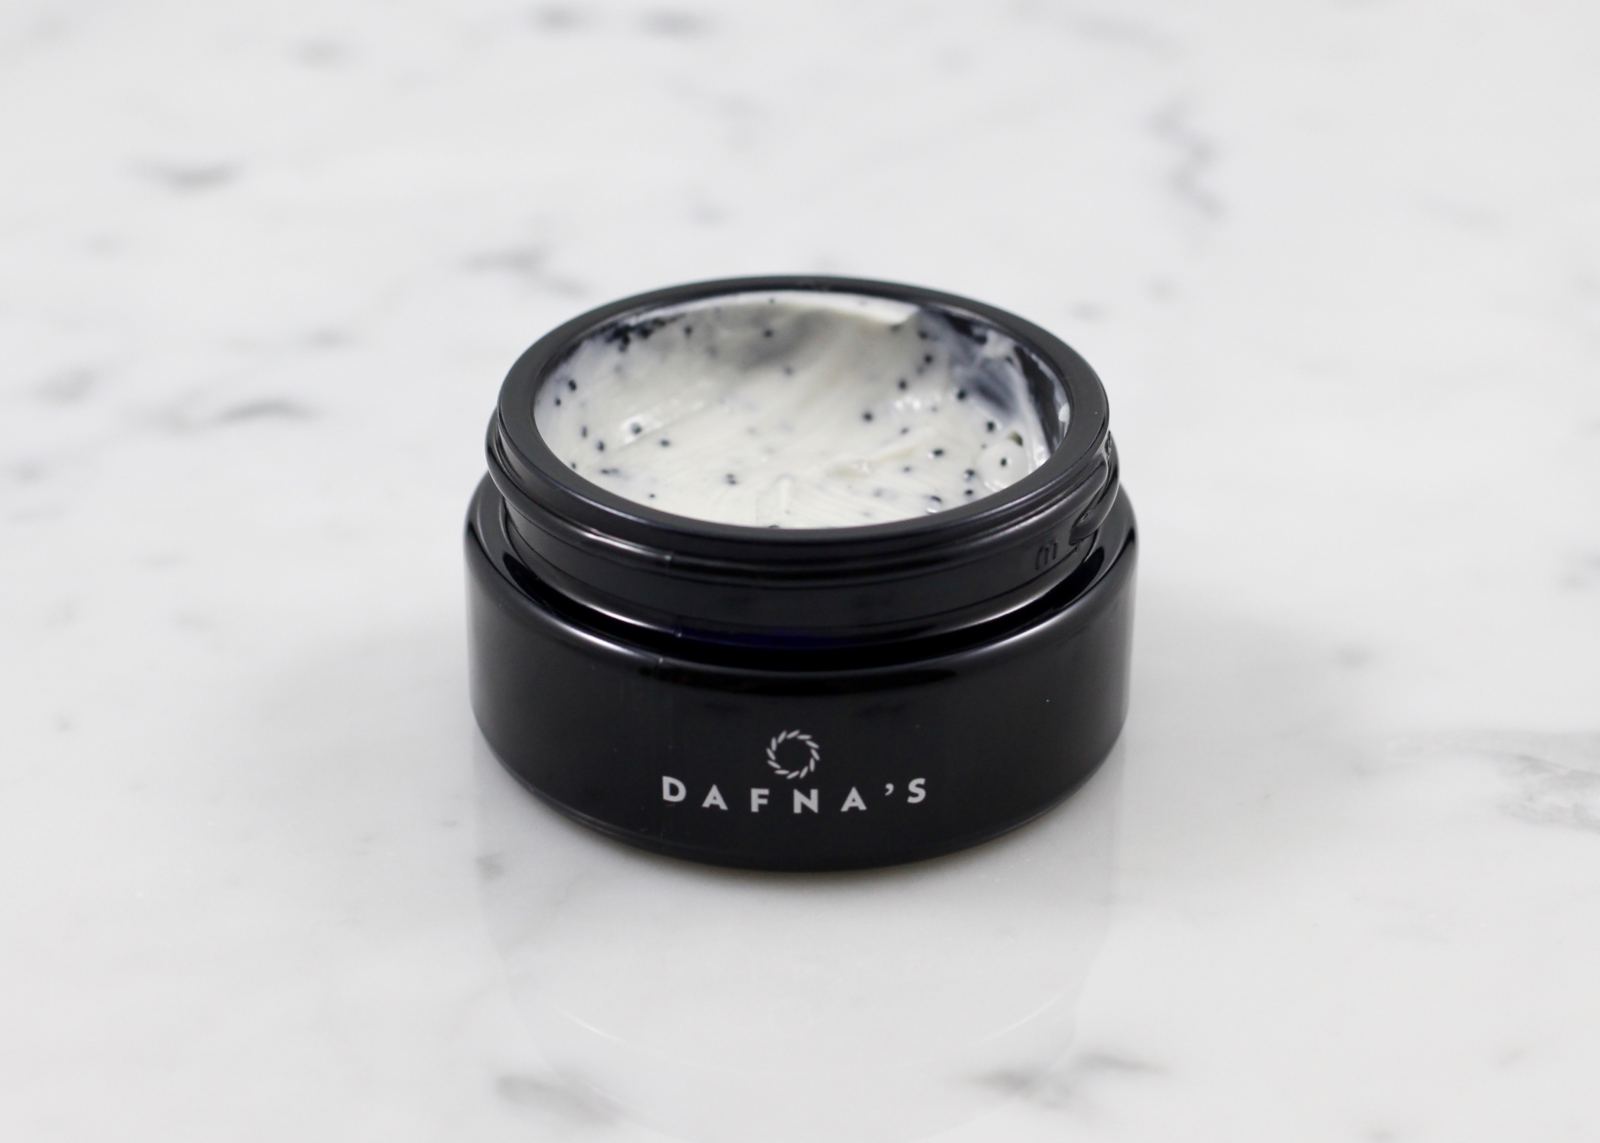 Product Review: Dafna’s Personal Skin Care Revival Bio-Active Beauty Mask